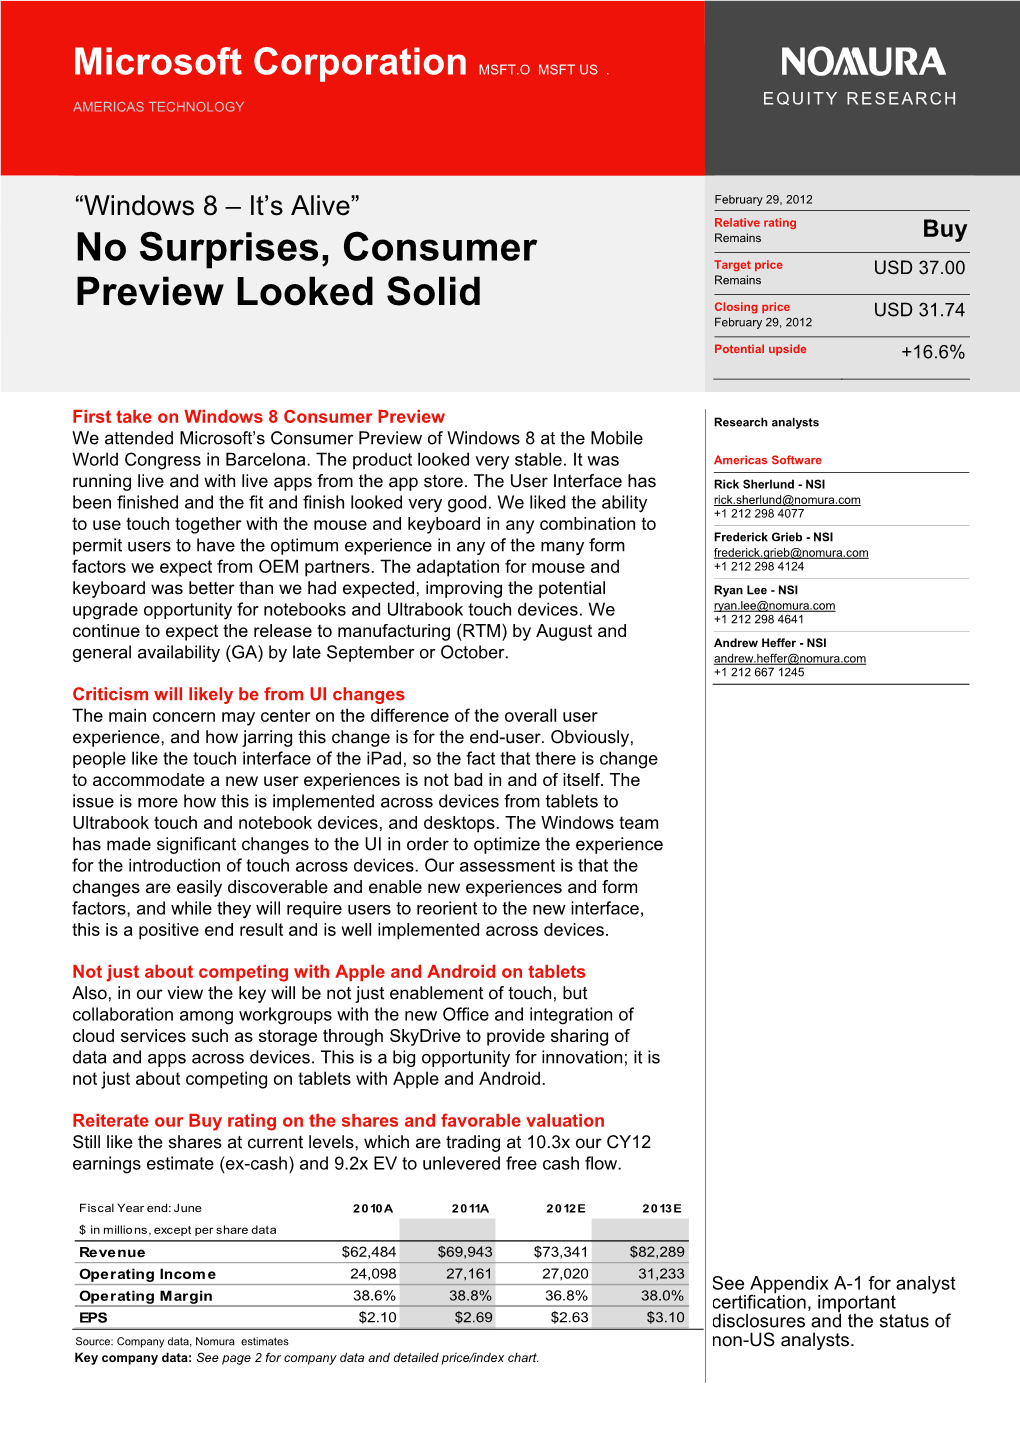 No Surprises, Consumer Preview Looked Solid